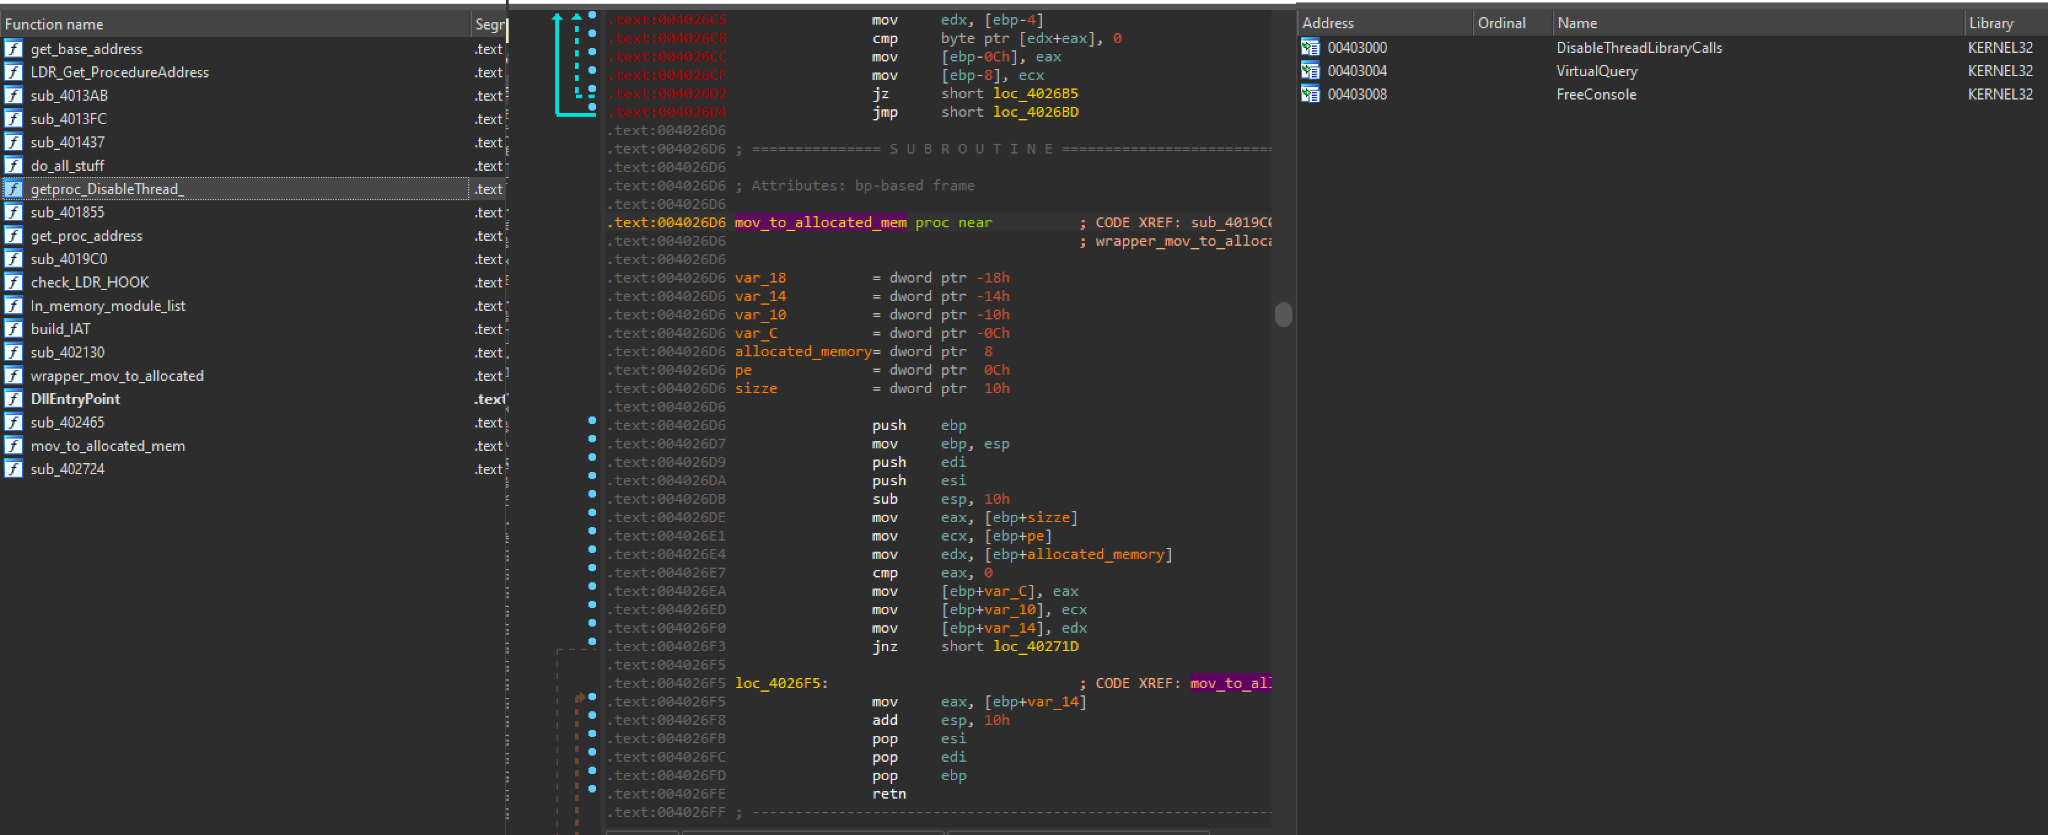 Renamed functions (left), check for LdrLoadDll hook (center), disableThreadLibraryCalls in imports (right).